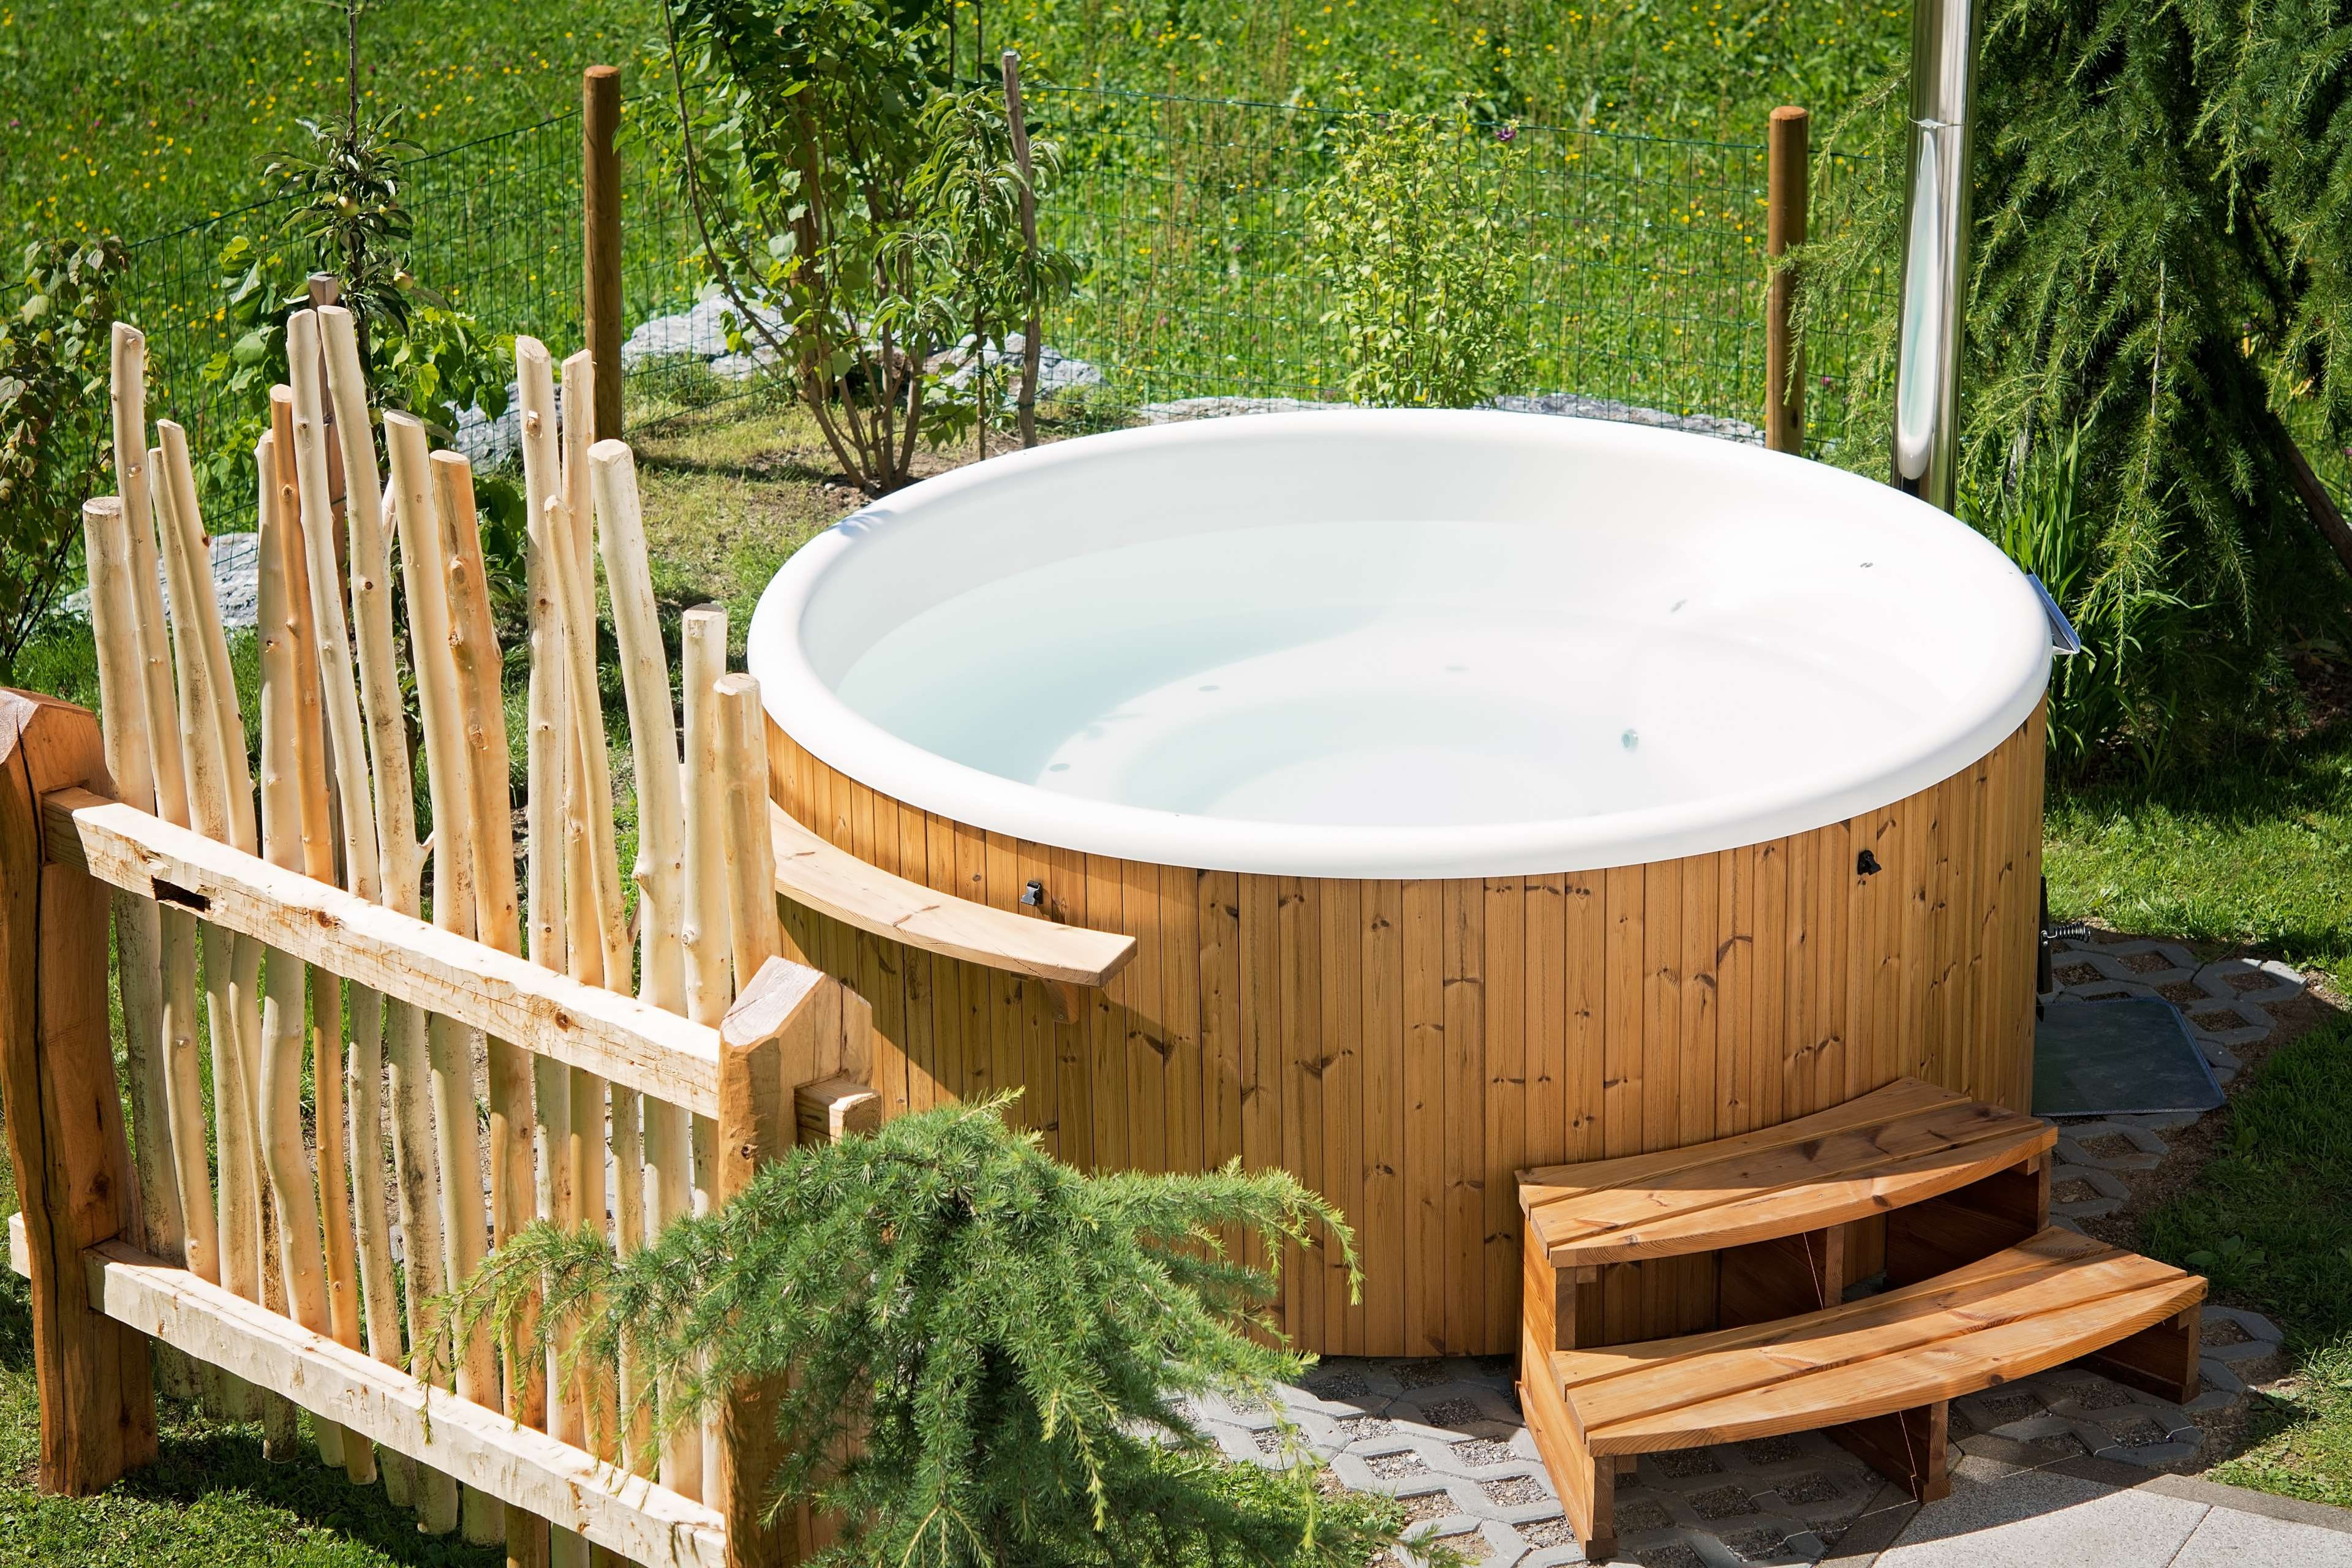 backyard, hot tub, leisure, outdoors, wooden, plant, wood - material